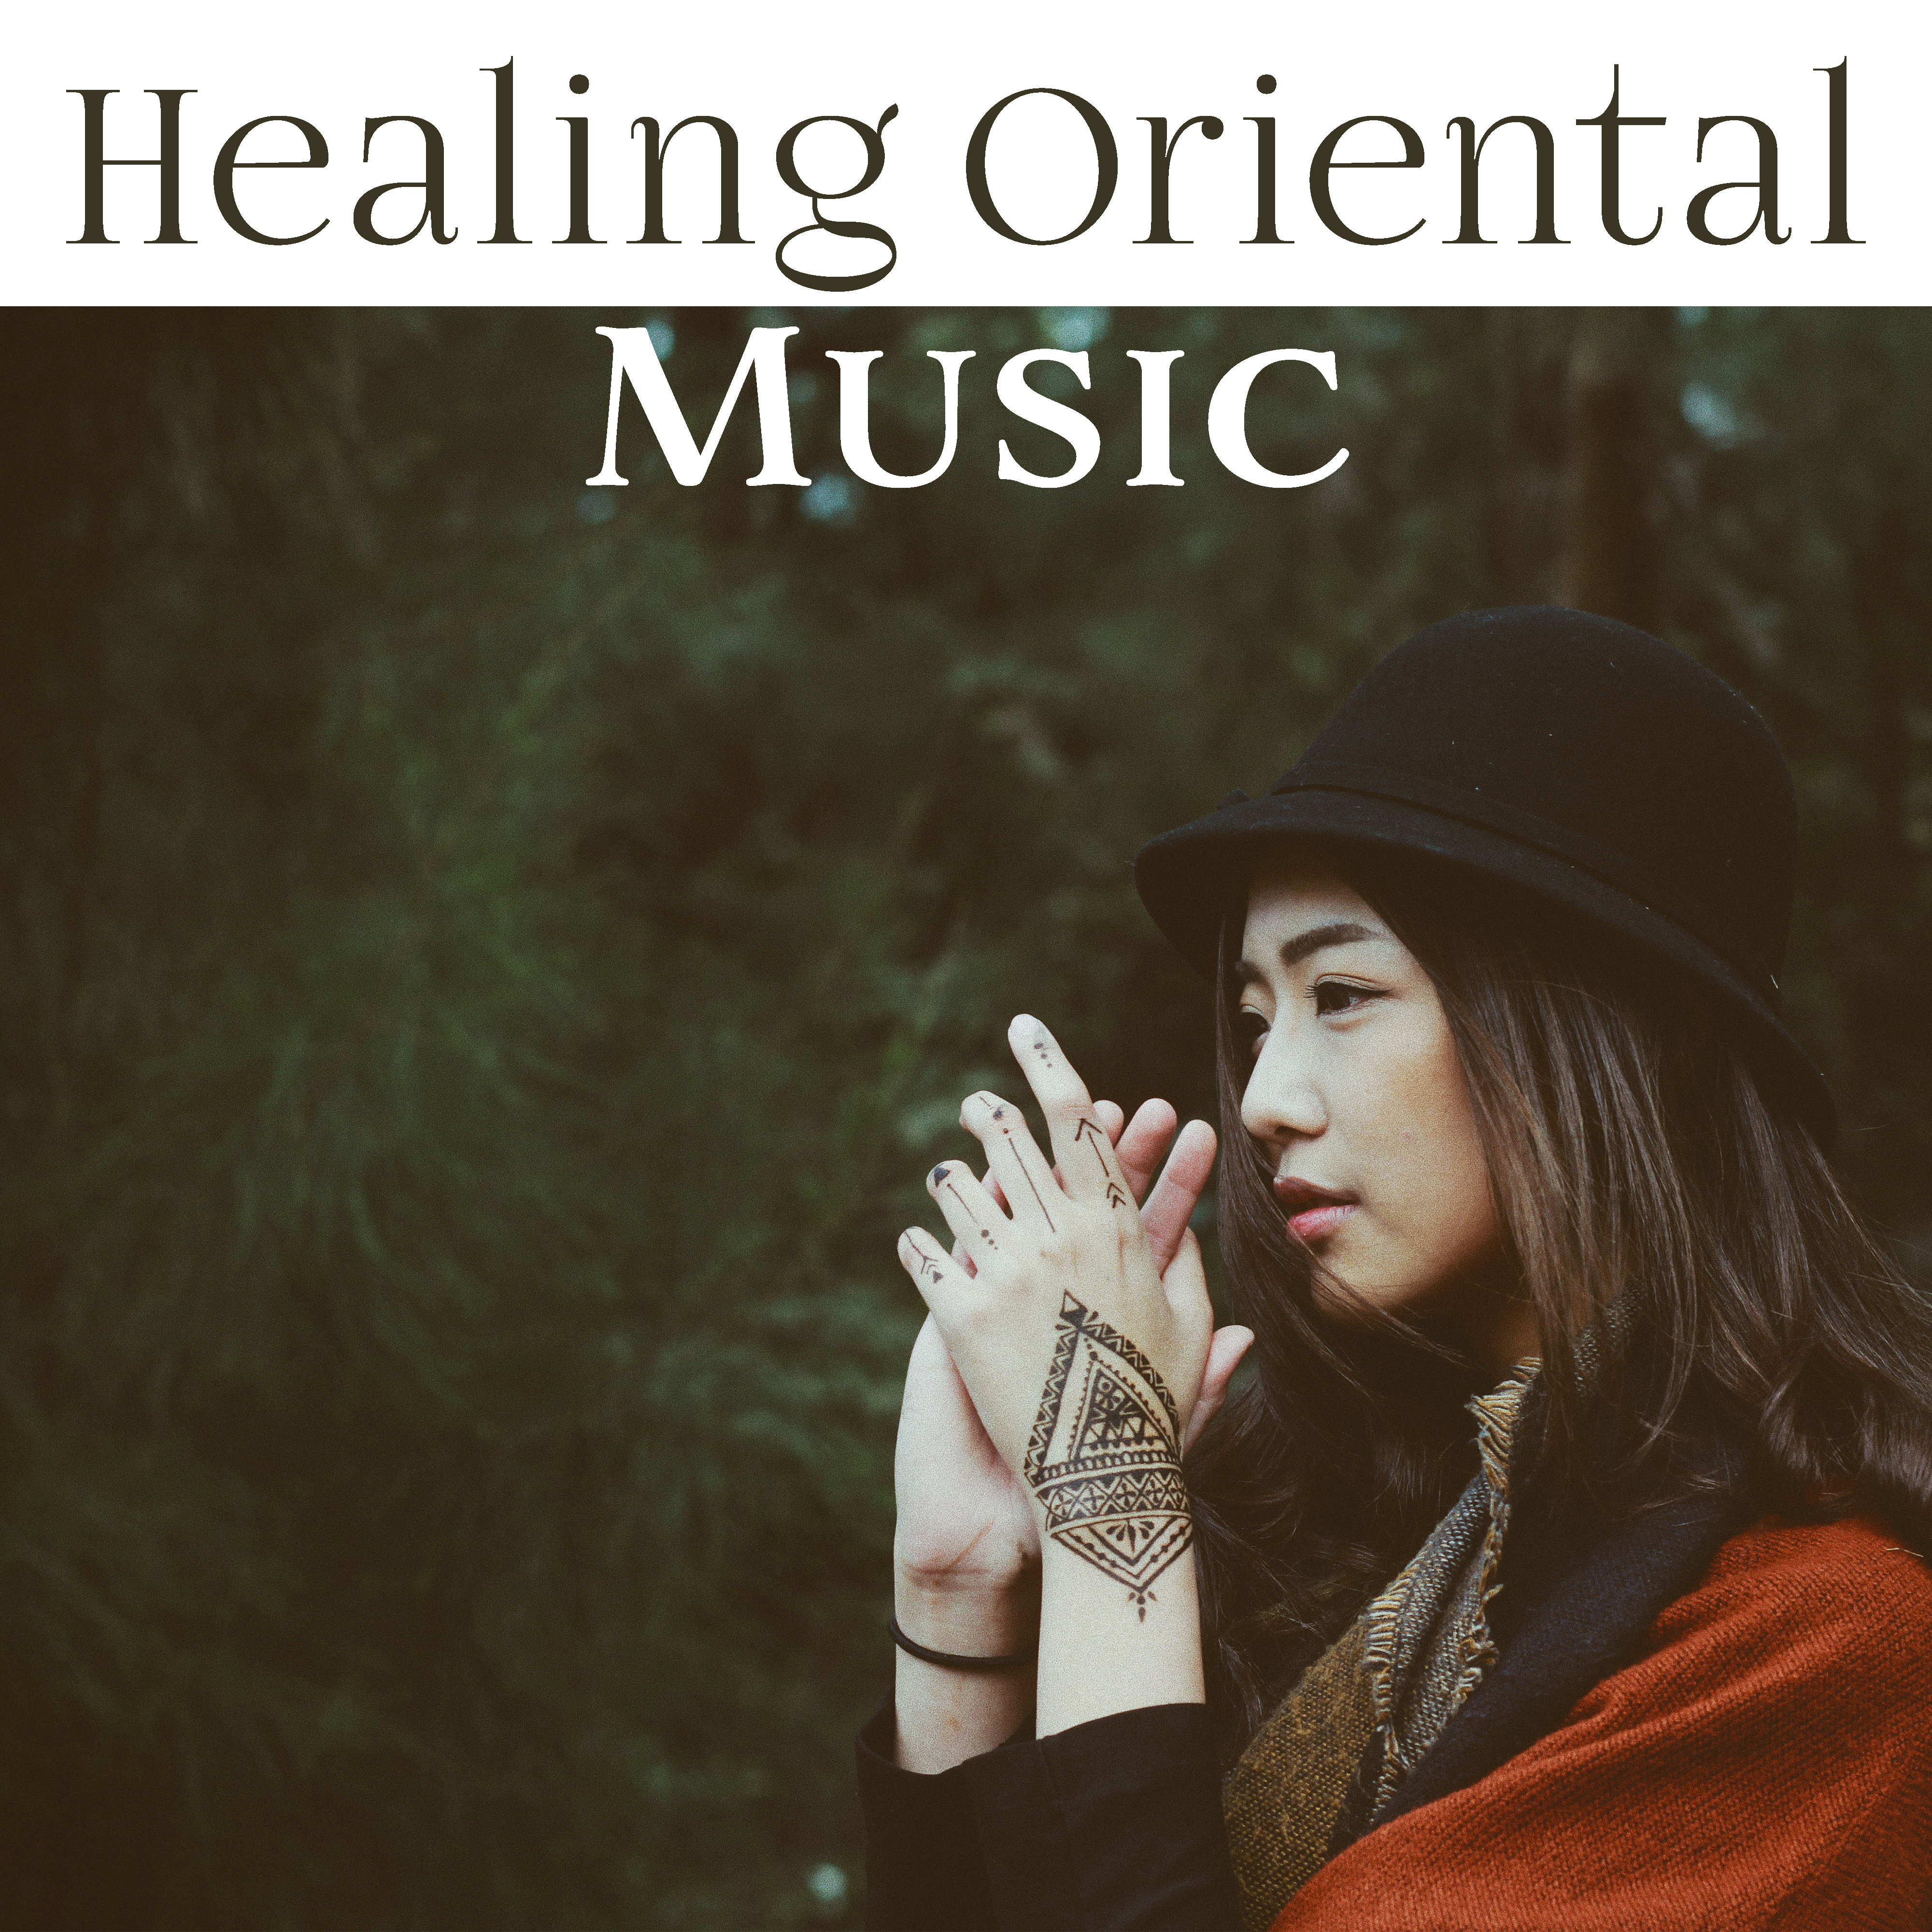 Healing Oriental Music – Soft Sounds for Mind Calmness, Easy Listening, New Age Melodies